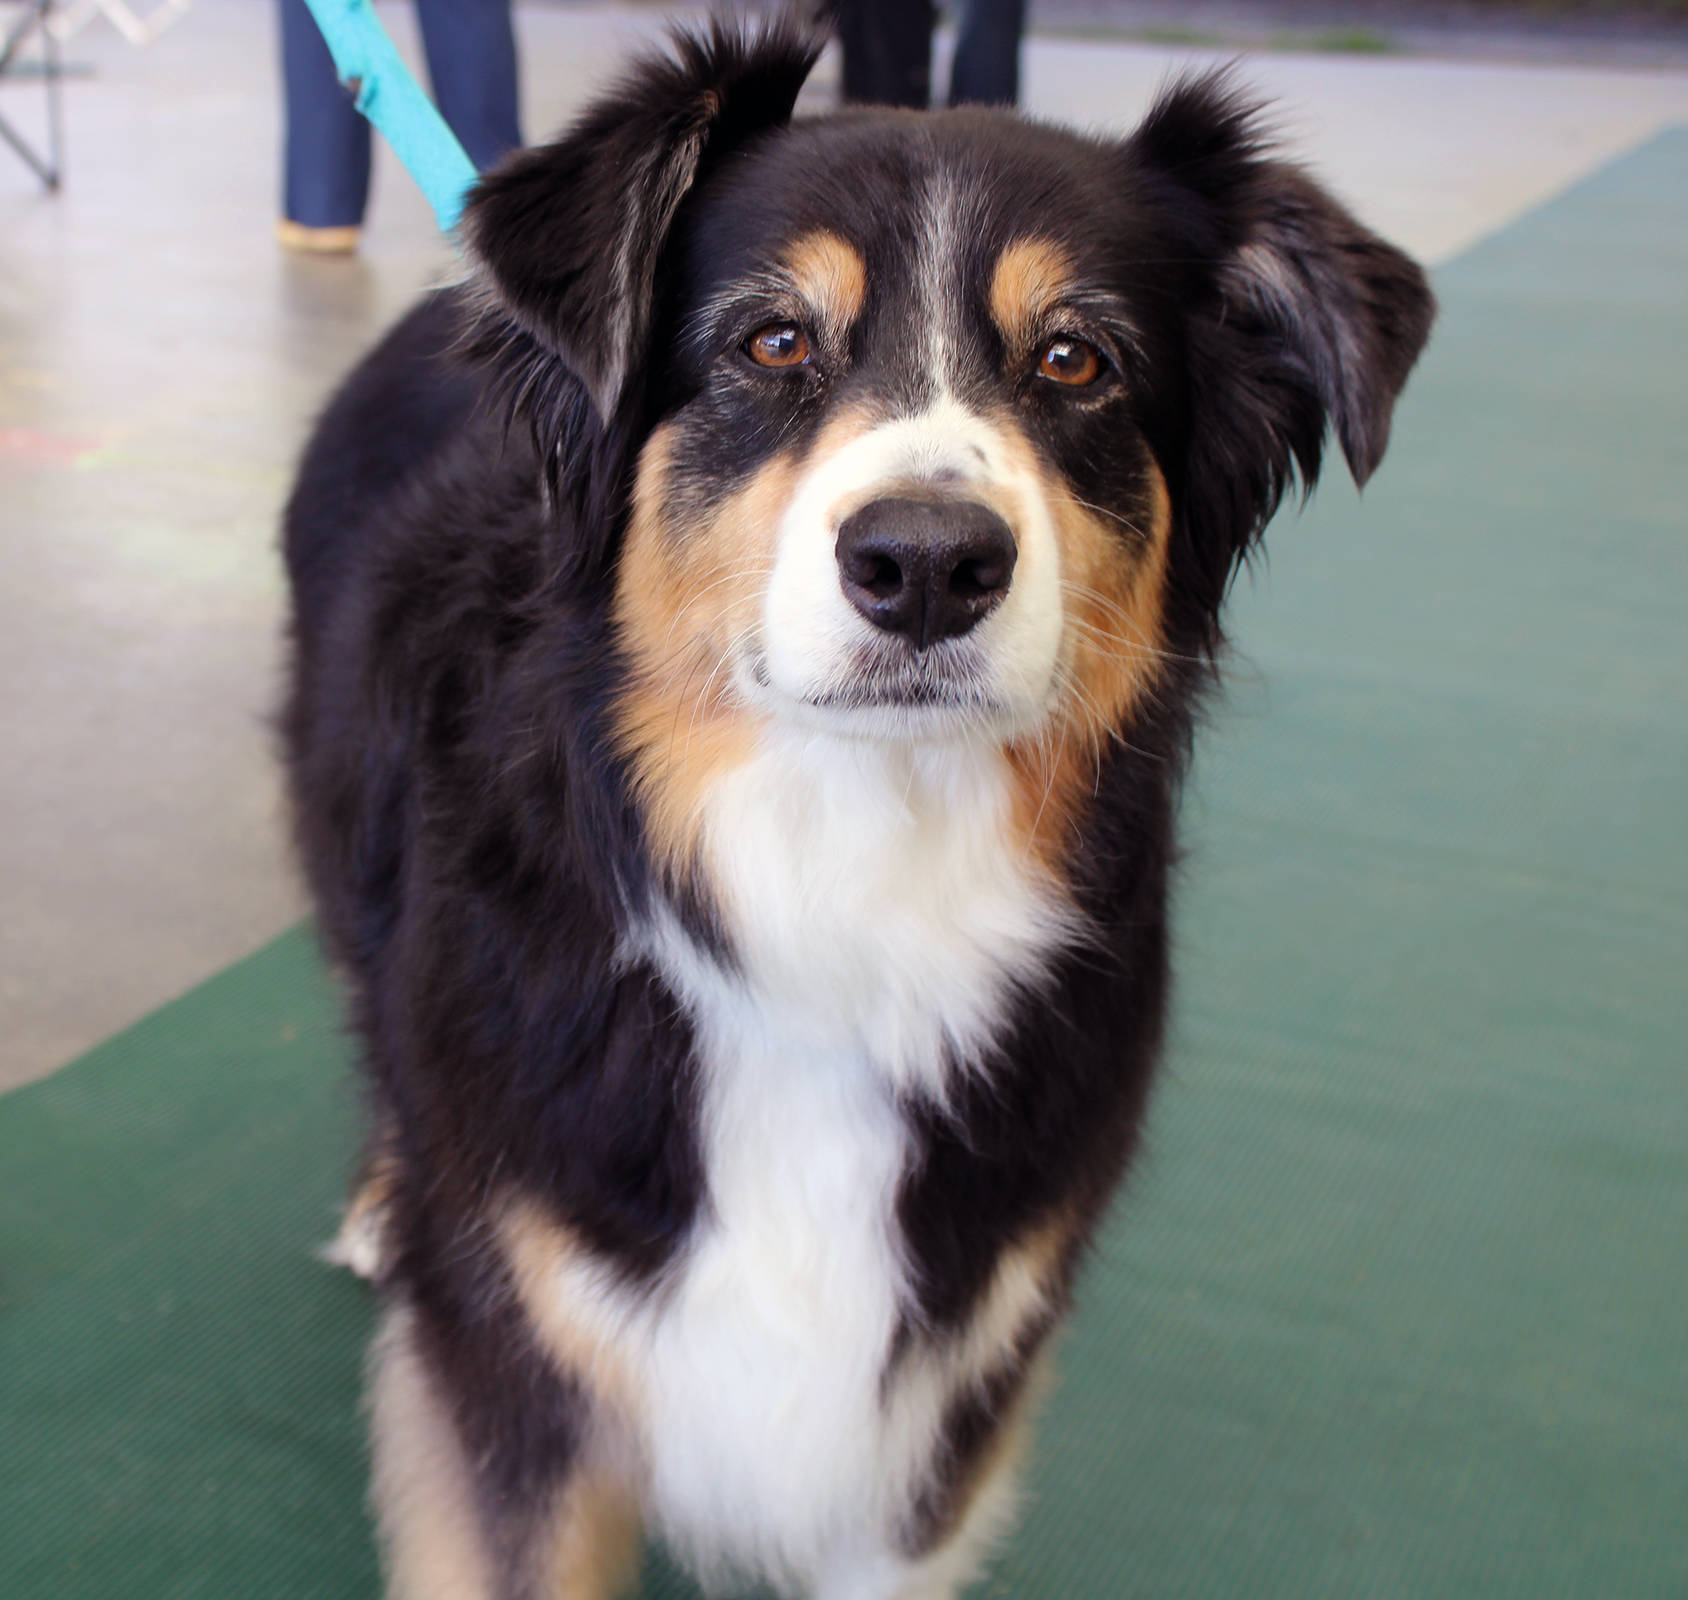 Kaya was among the dogs who participated in Capital Kennel Club of Juneau’s obedience trials on Saturday, Aug. 29 at Auke Bay Elementary School. A total of eight dogs competed across three different levels. (Ben Hohenstatt / Juneau Empire)